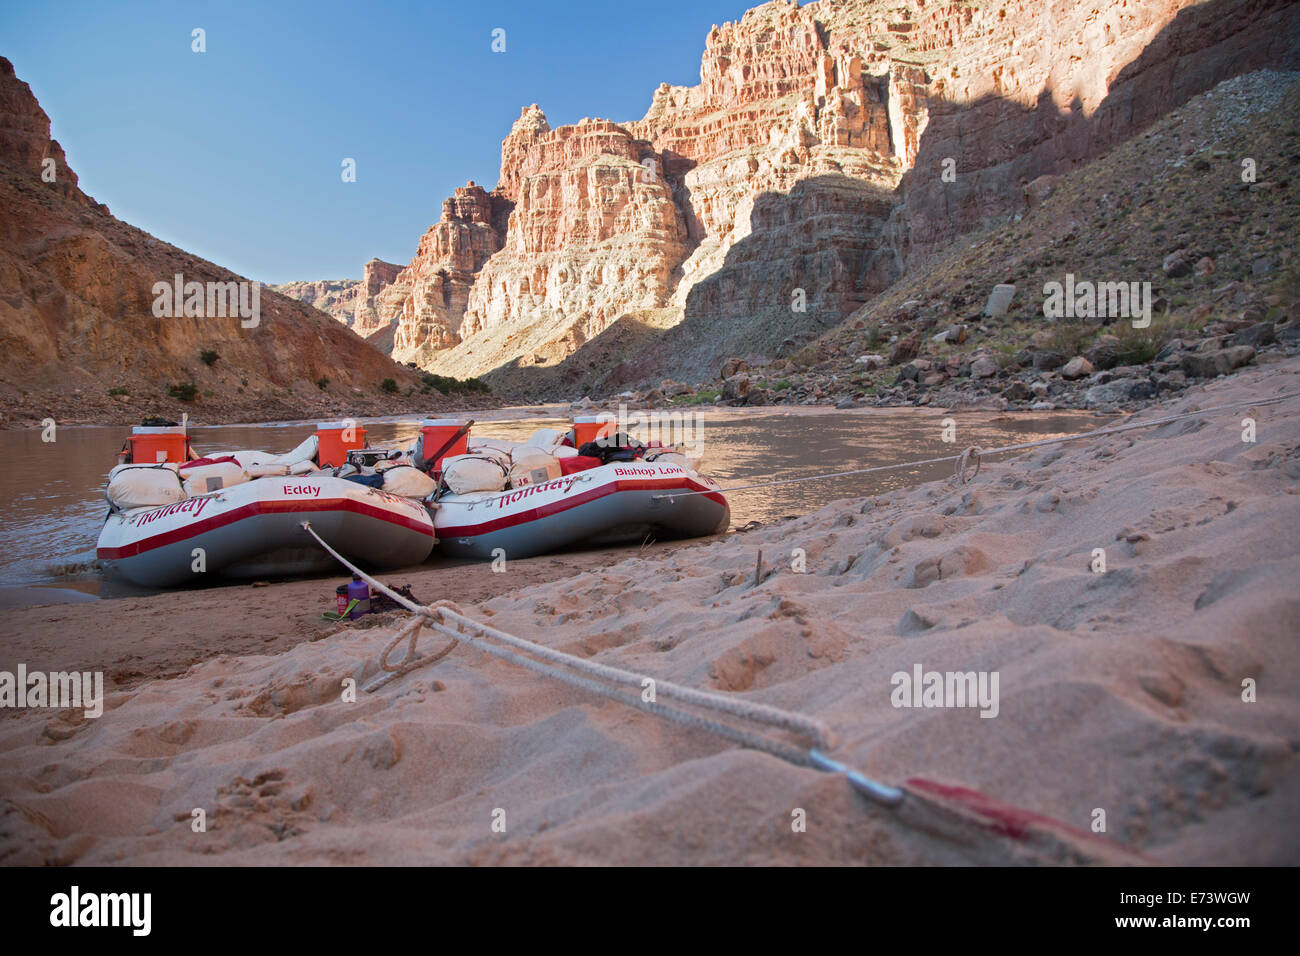 Canyonlands National Park, Utah - Rafts anchored at a campsite during a trip on the Colorado River through Cataract Canyon Stock Photo